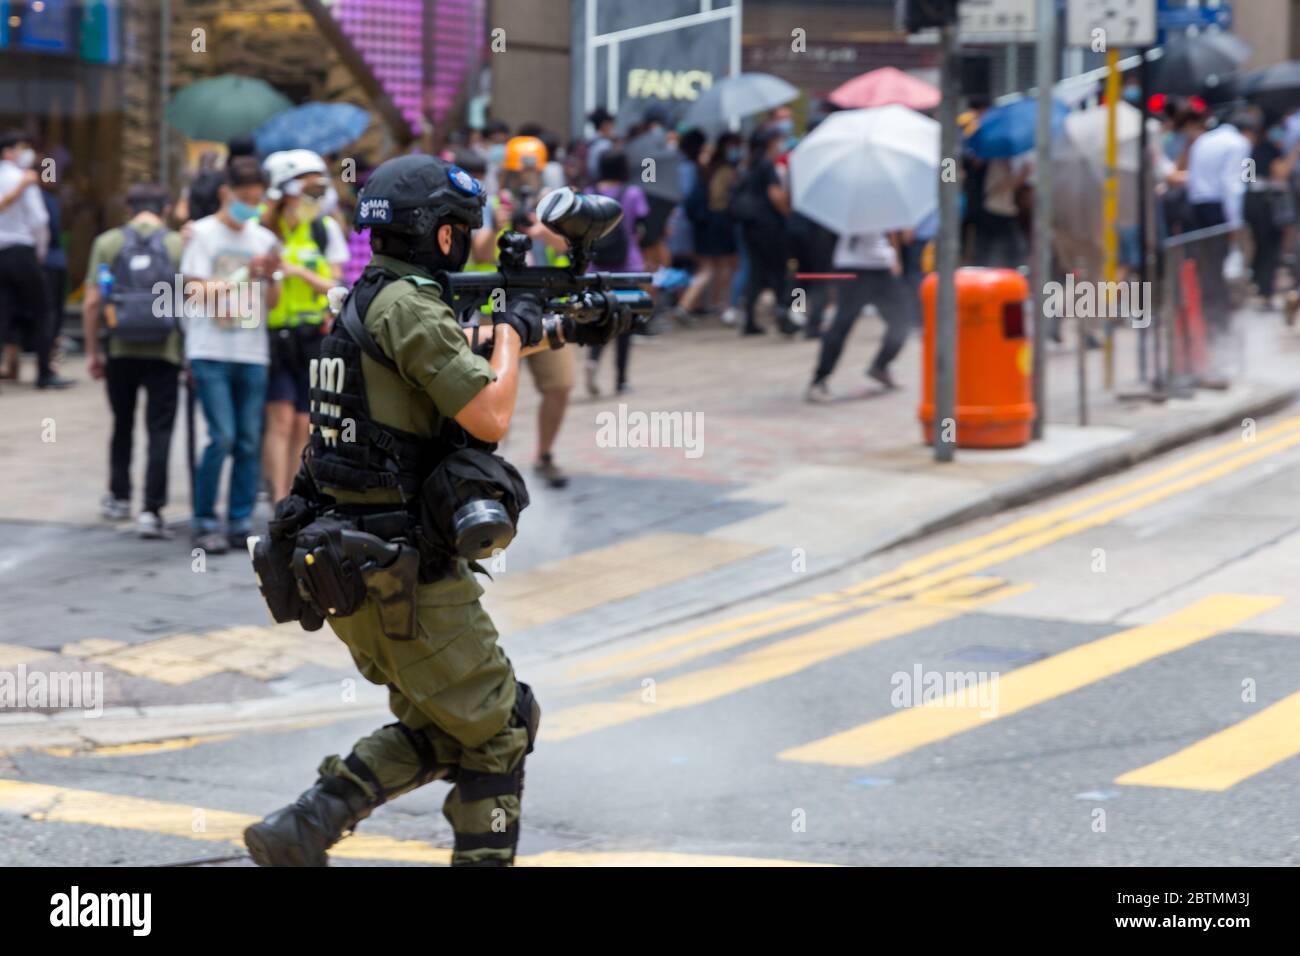 Central, Hong Kong. 27 May, 2020 Hong Kong Protest Anti-National Anthem Law. Female Police Officer fires pepper balls into the crowd. Credit: David Ogg / Alamy Live News Stock Photo